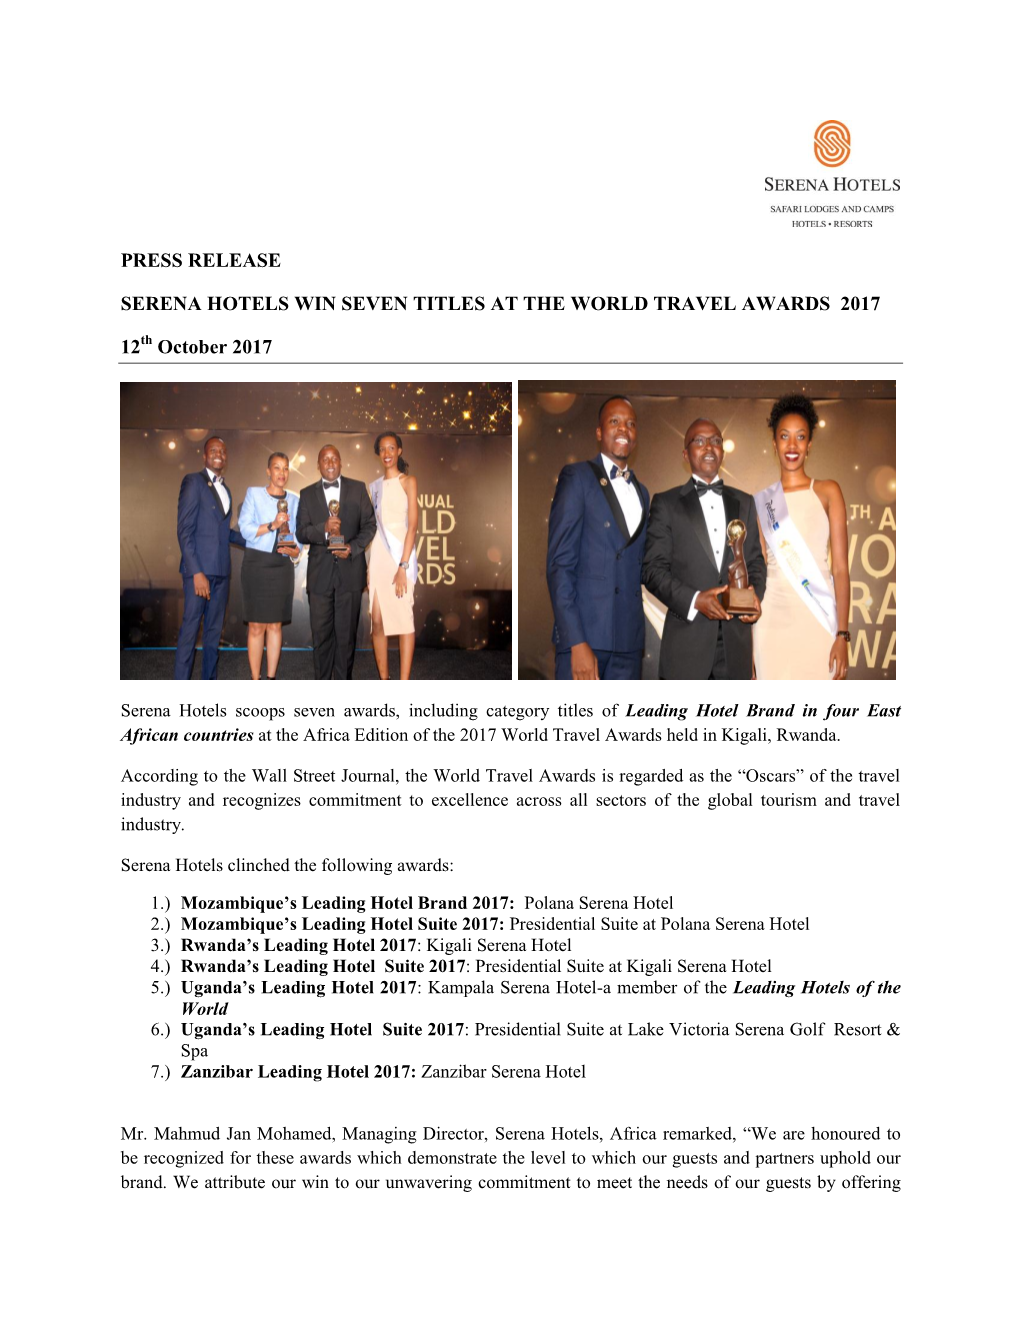 PRESS RELEASE SERENA HOTELS WIN SEVEN TITLES at the WORLD TRAVEL AWARDS 2017 12 October 2017